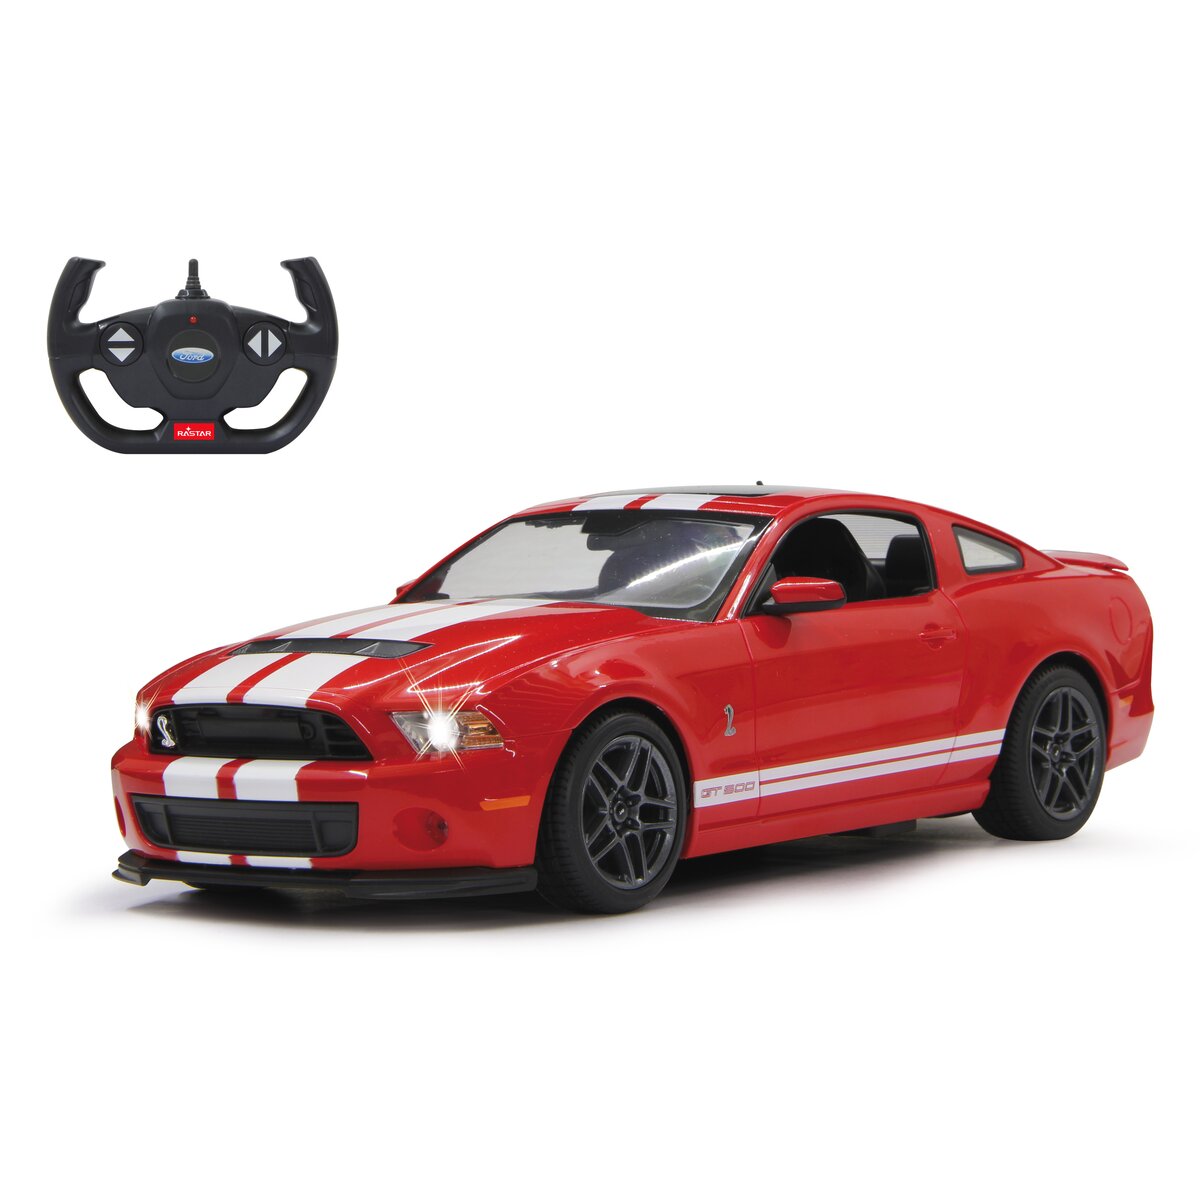 Ford Shelby GT500 1:14 rosso 2,4GHz